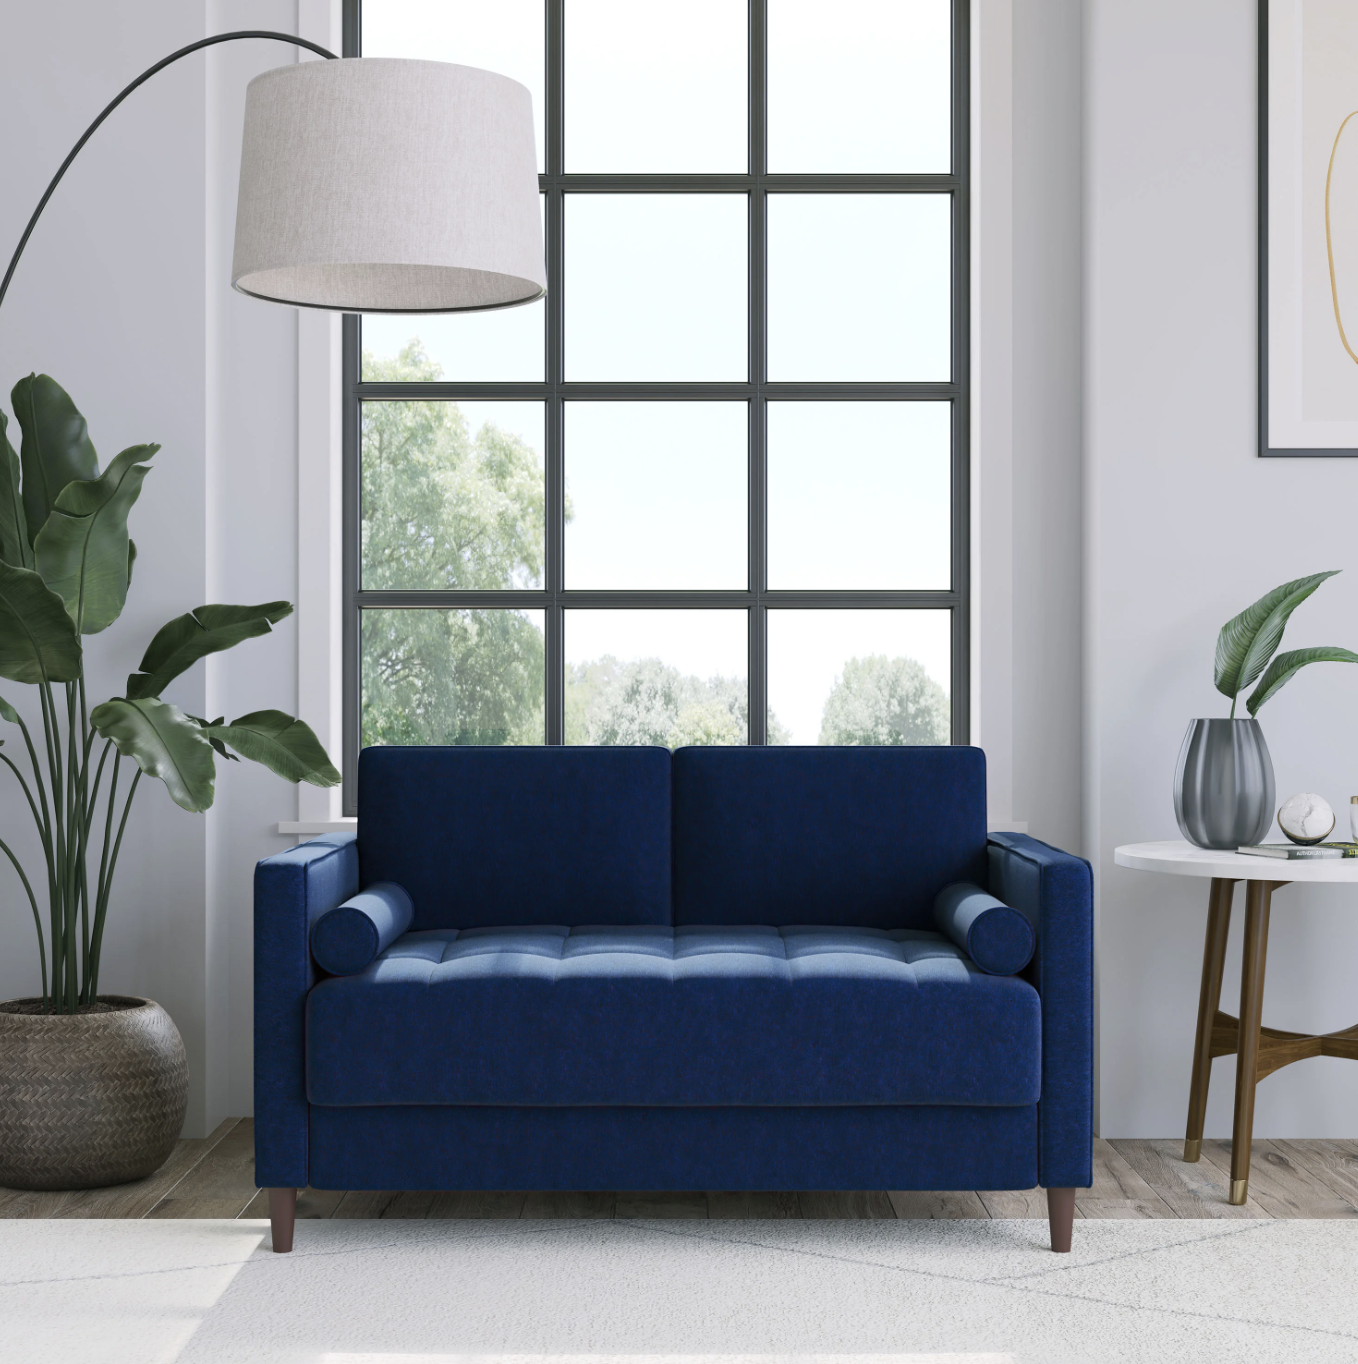 the blue couch